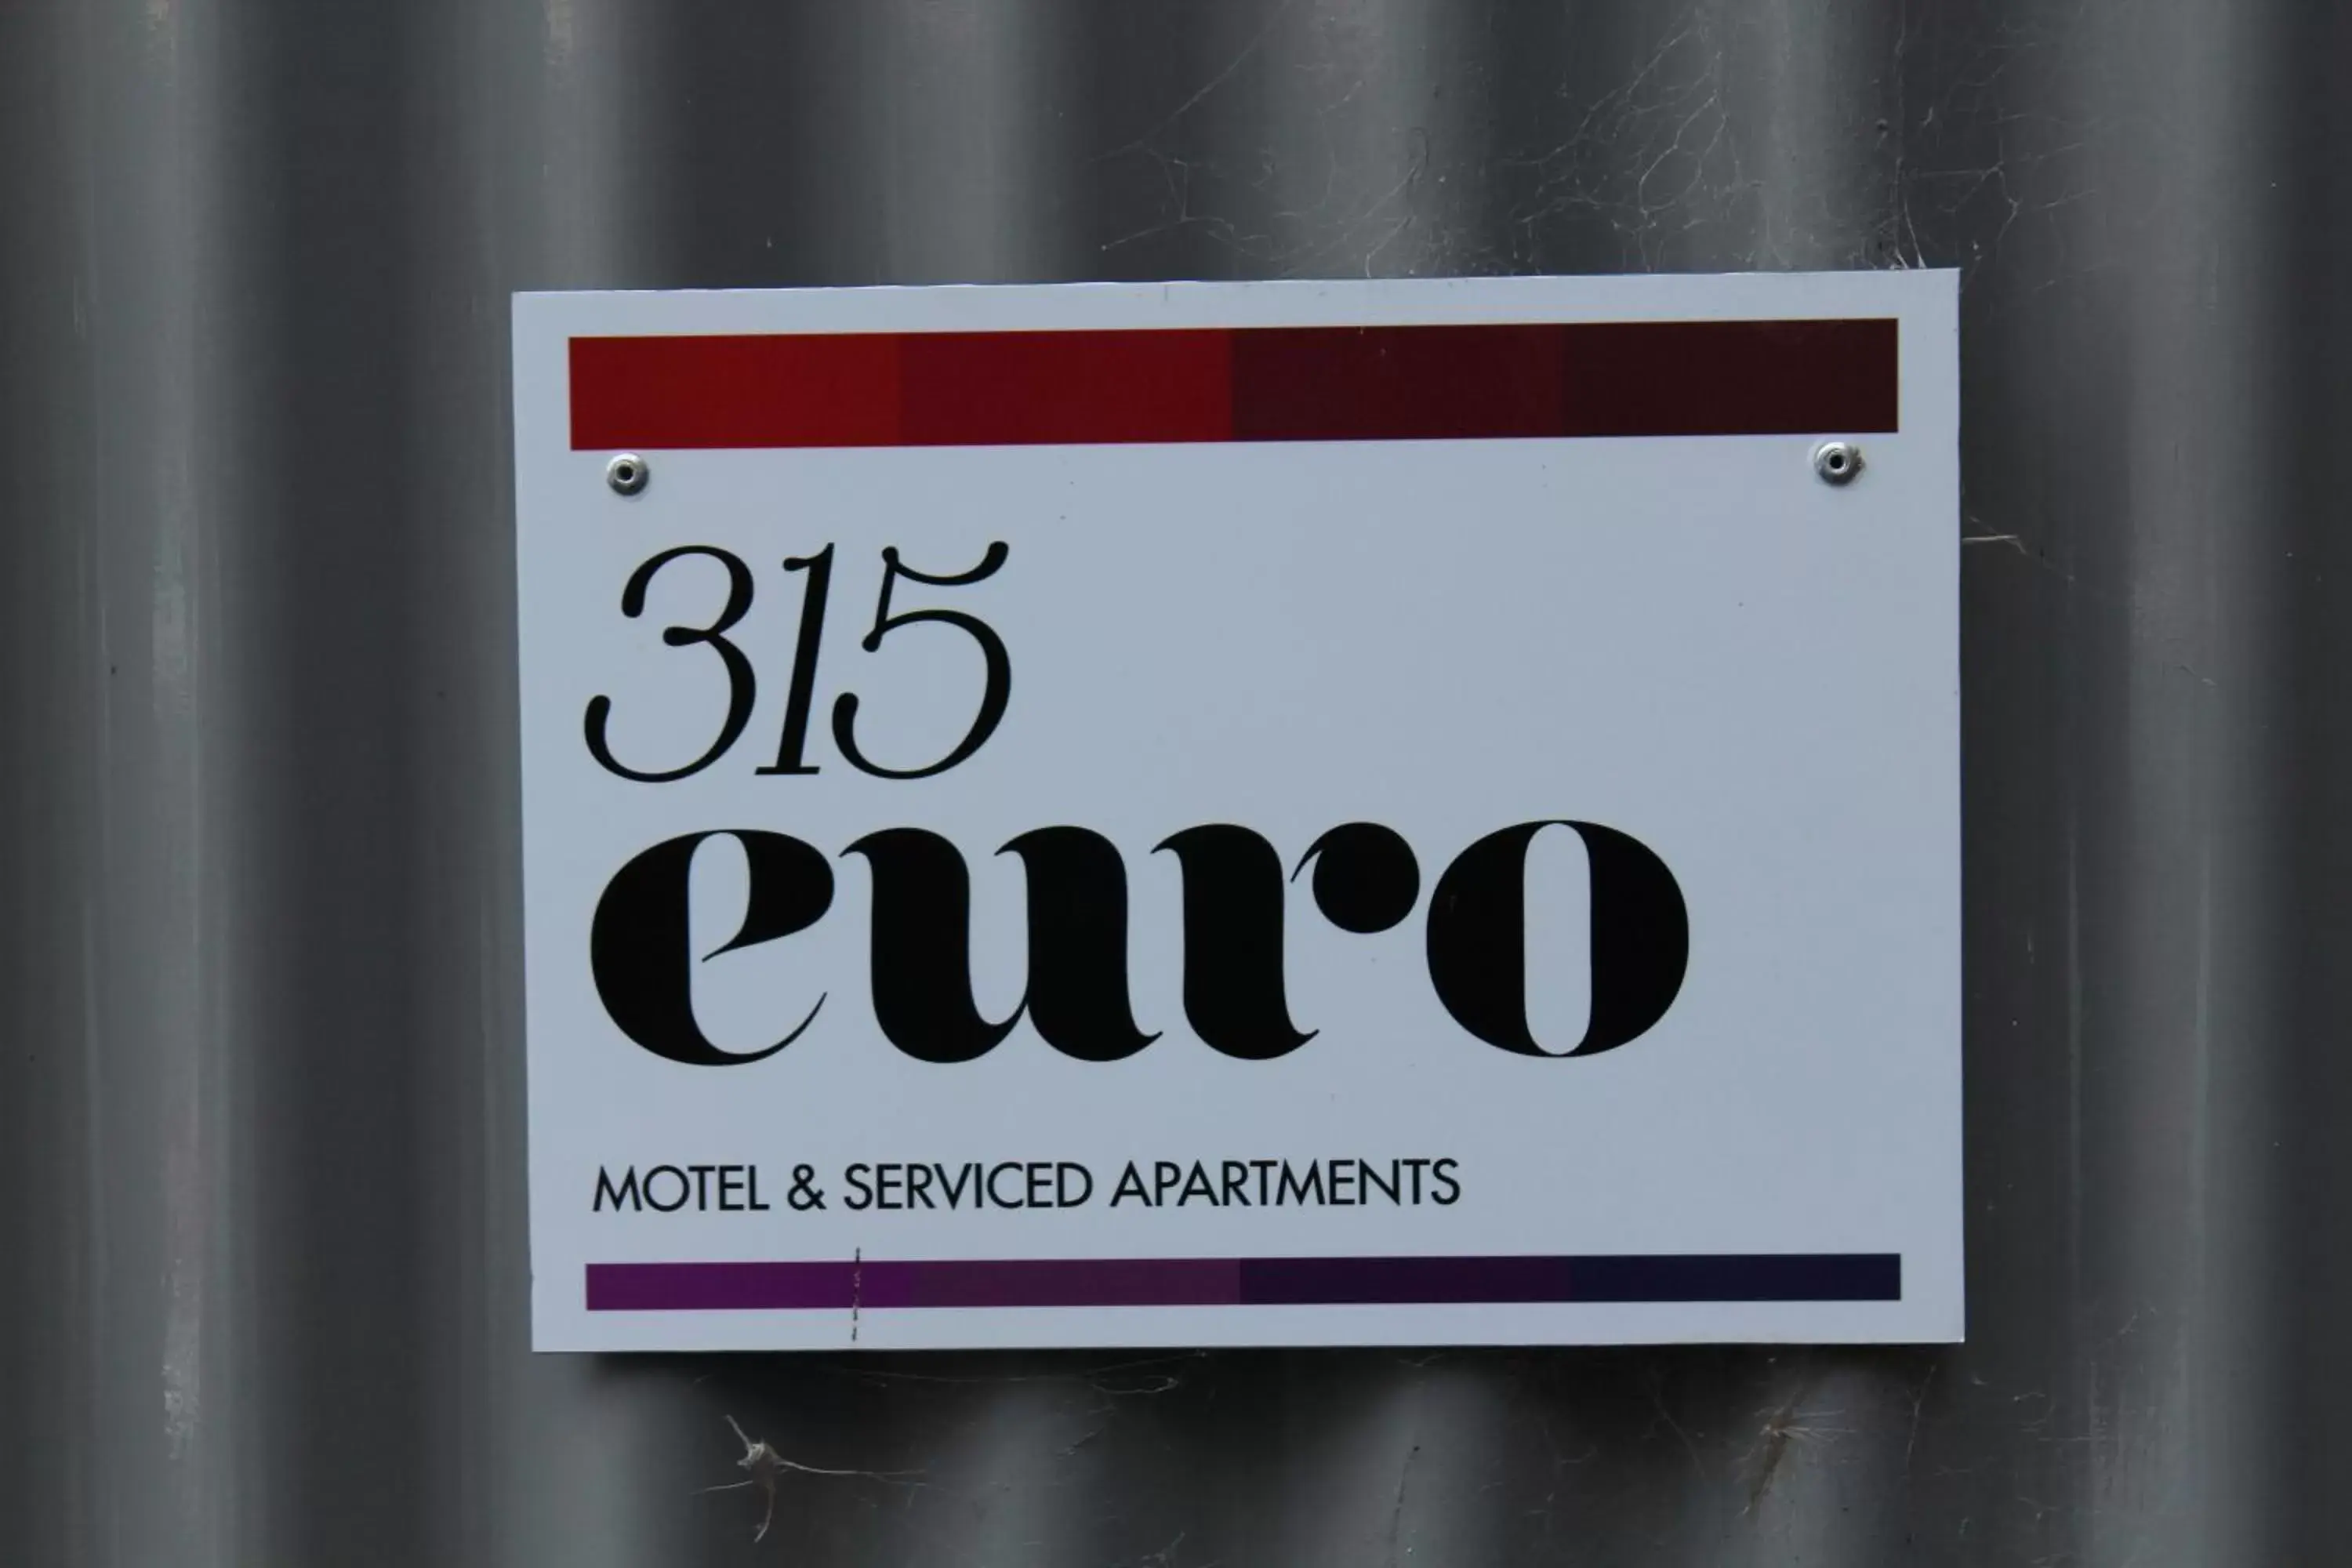 Other in 315 Euro Motel and Serviced Apartments